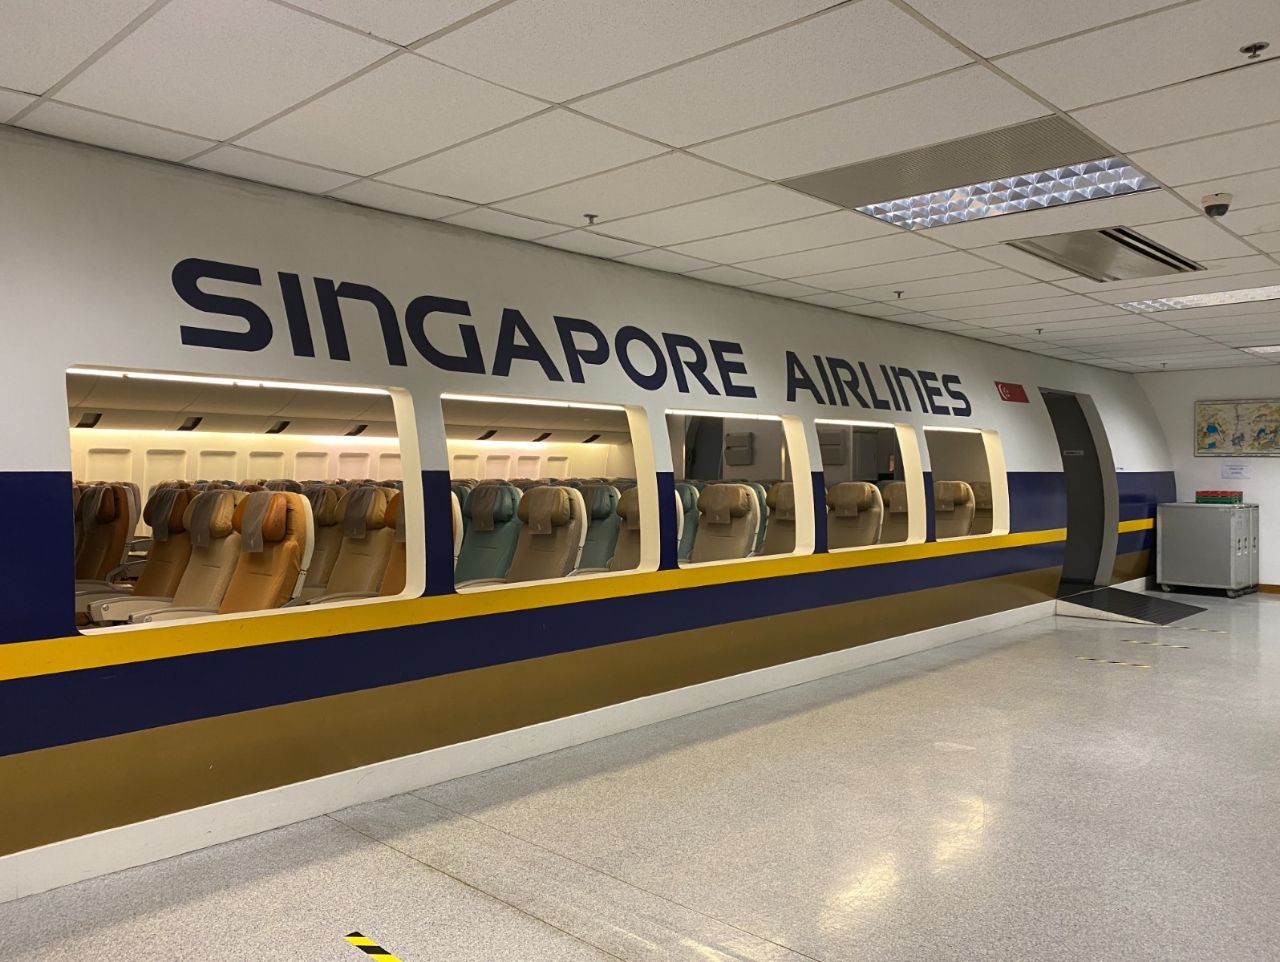 Singapore Airlines training facility